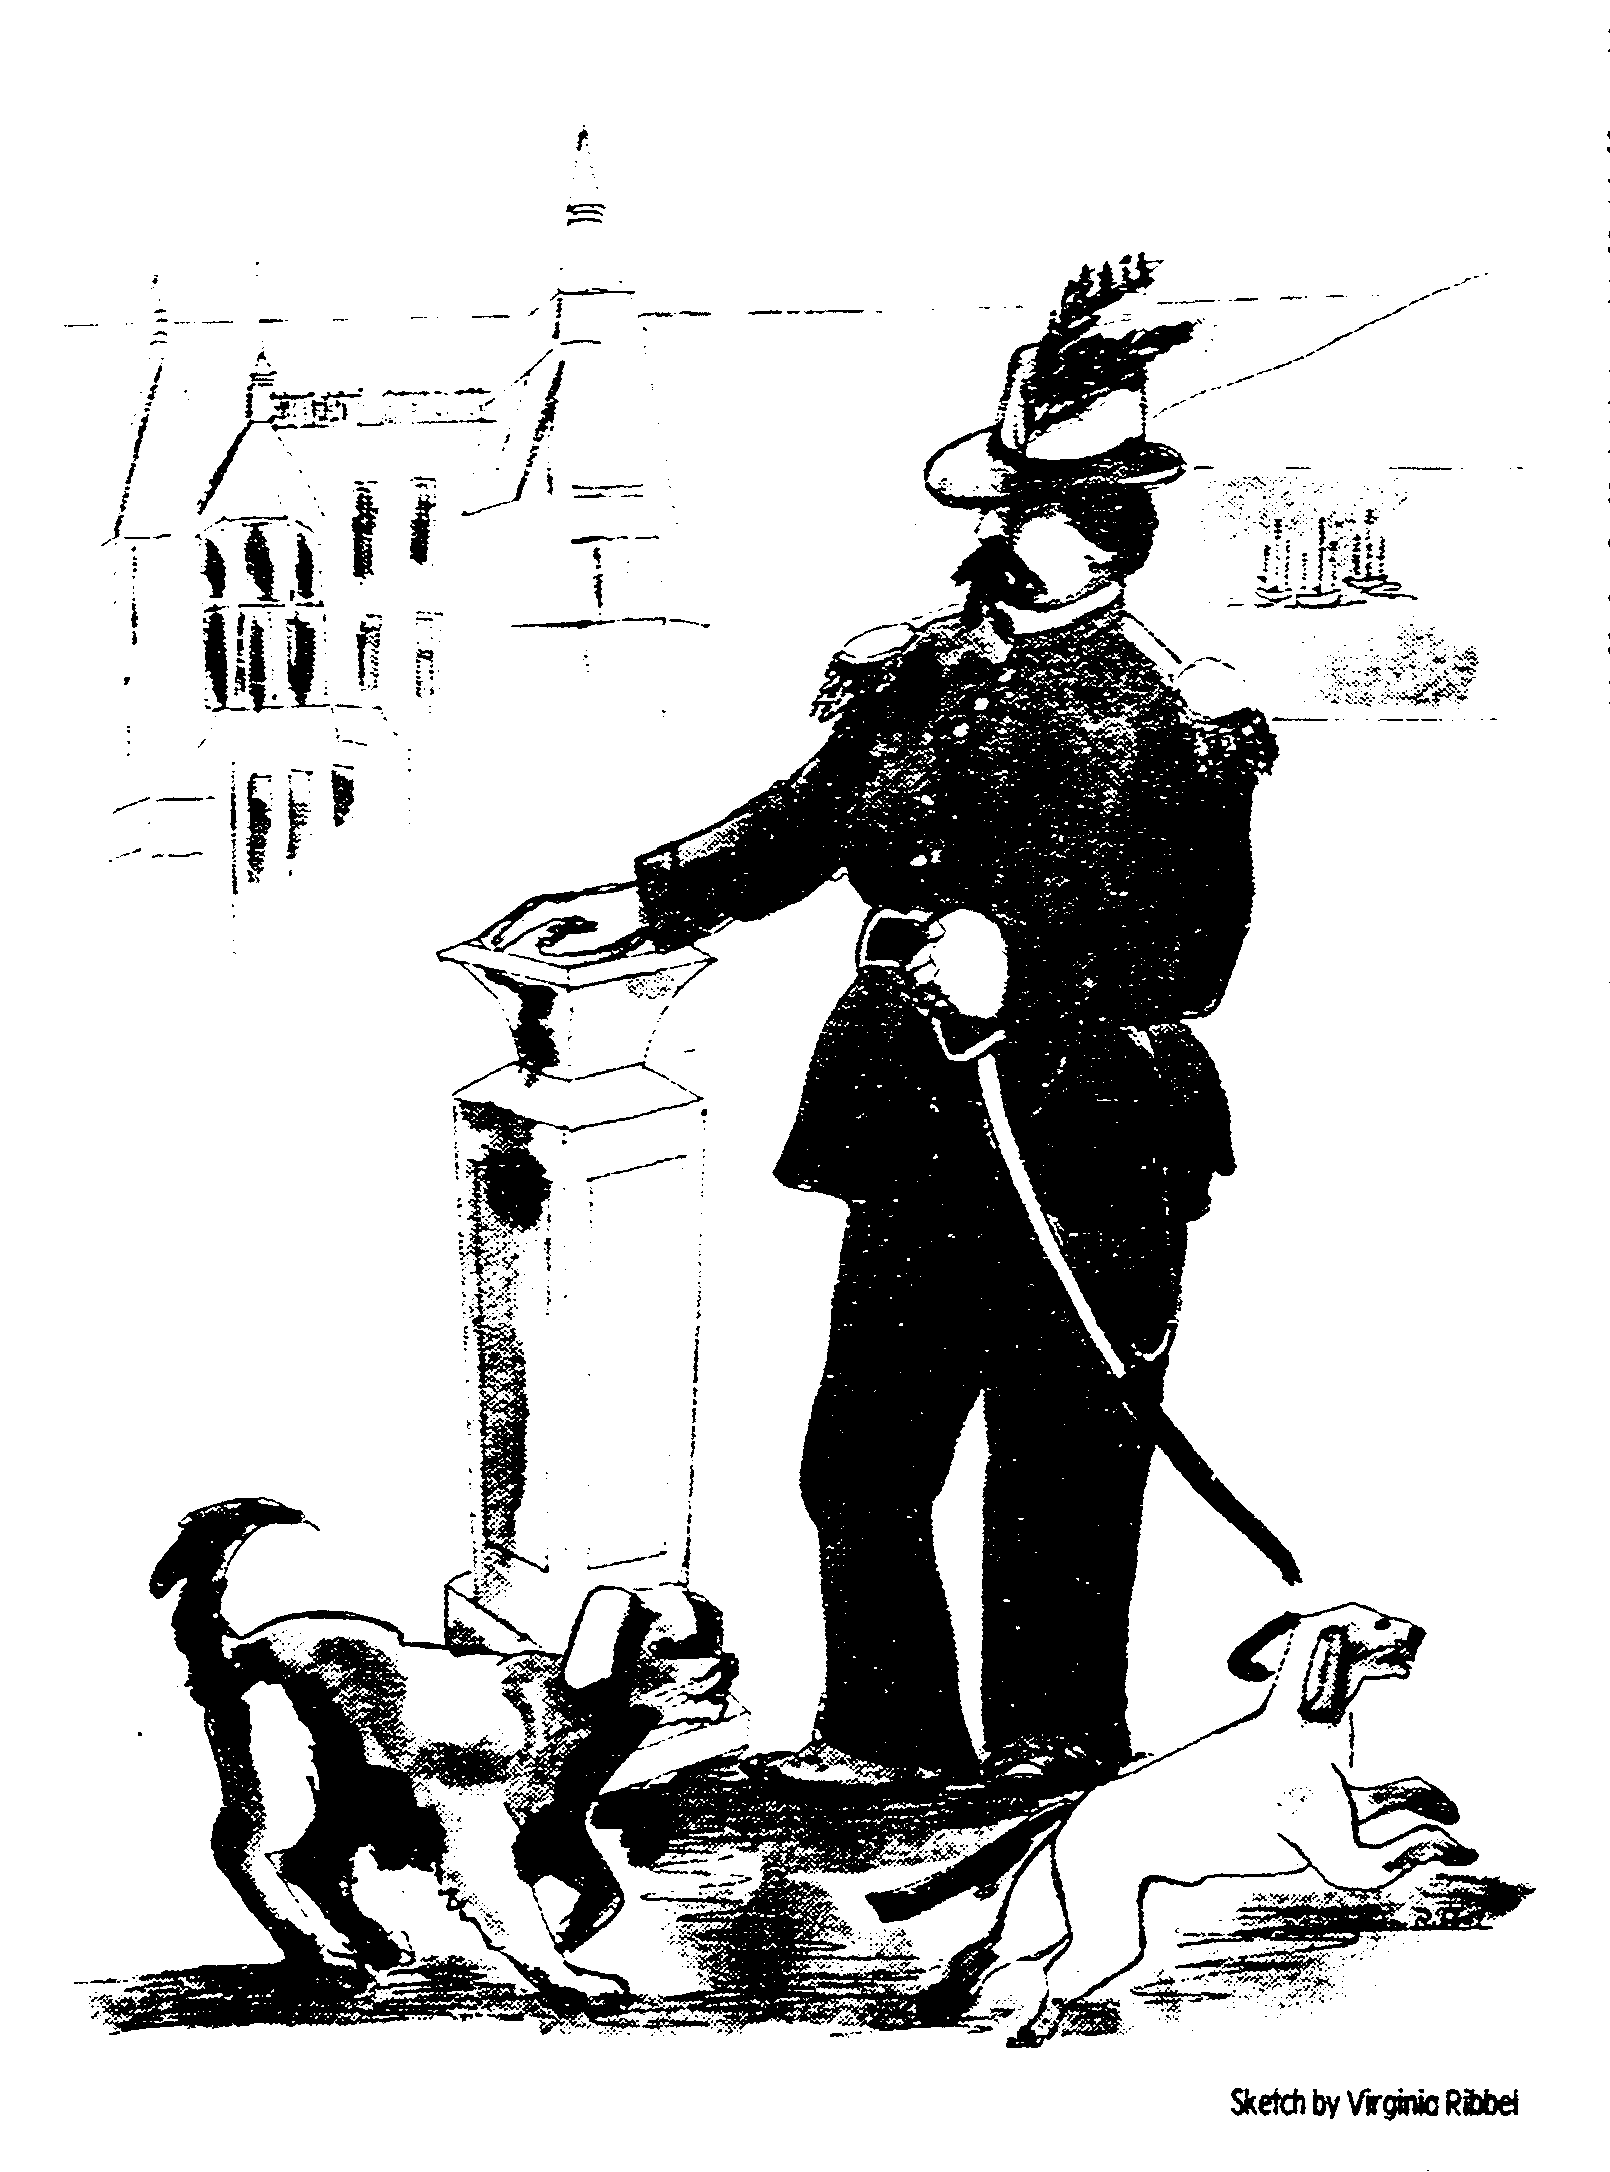   Emperor Norton, 1981, sketch by Virginia Ribbel (1913–2010).  Illustration for article, “Joshua A. Norton I — The Kindliest ‘Emperor of Them All” (Yesterday in the West column),  San Diego Union , 4 October 1981, Section G (Travel), p. 2. Source: G